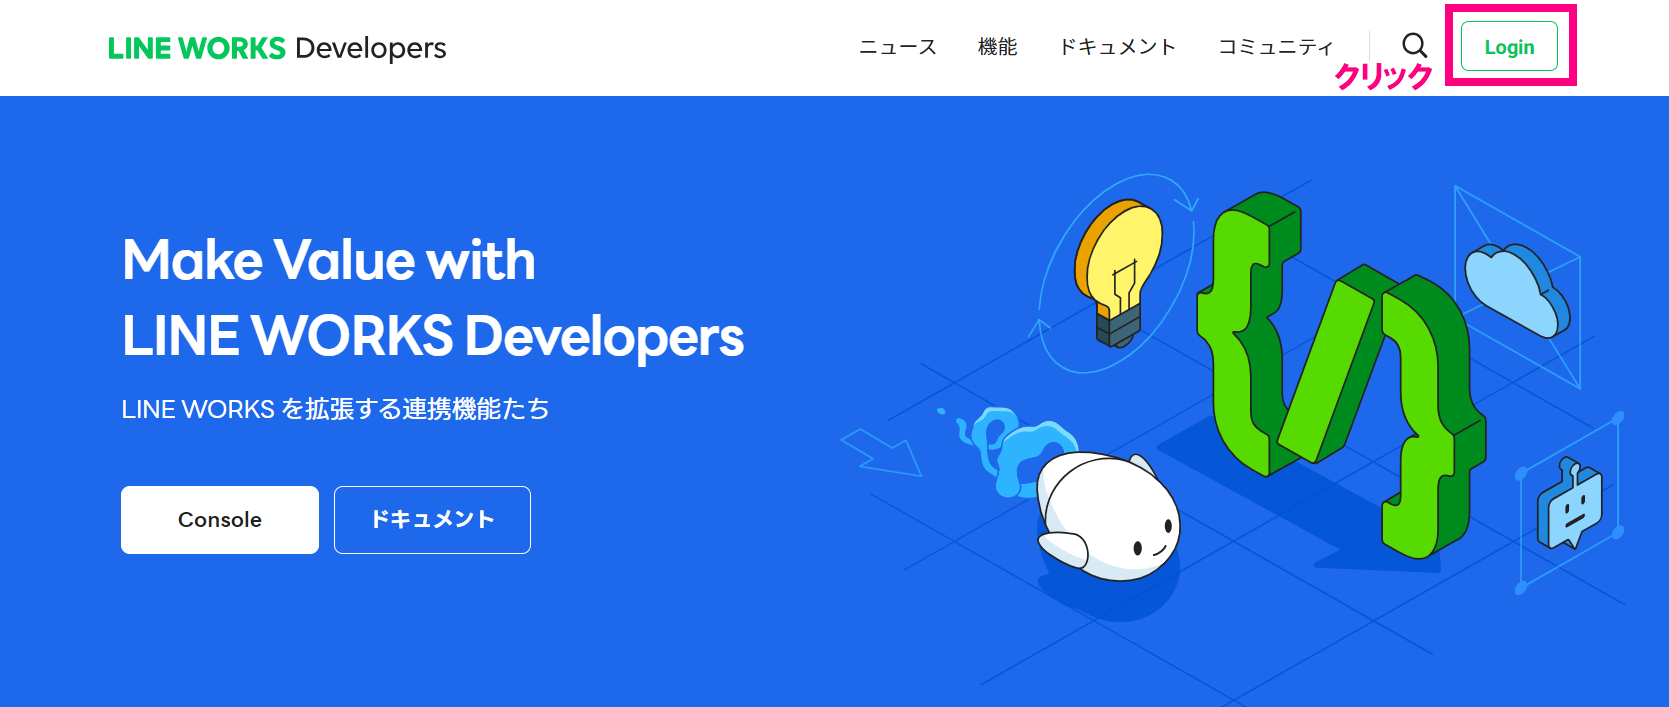 step5_LINE WORKS Developersログイン.png